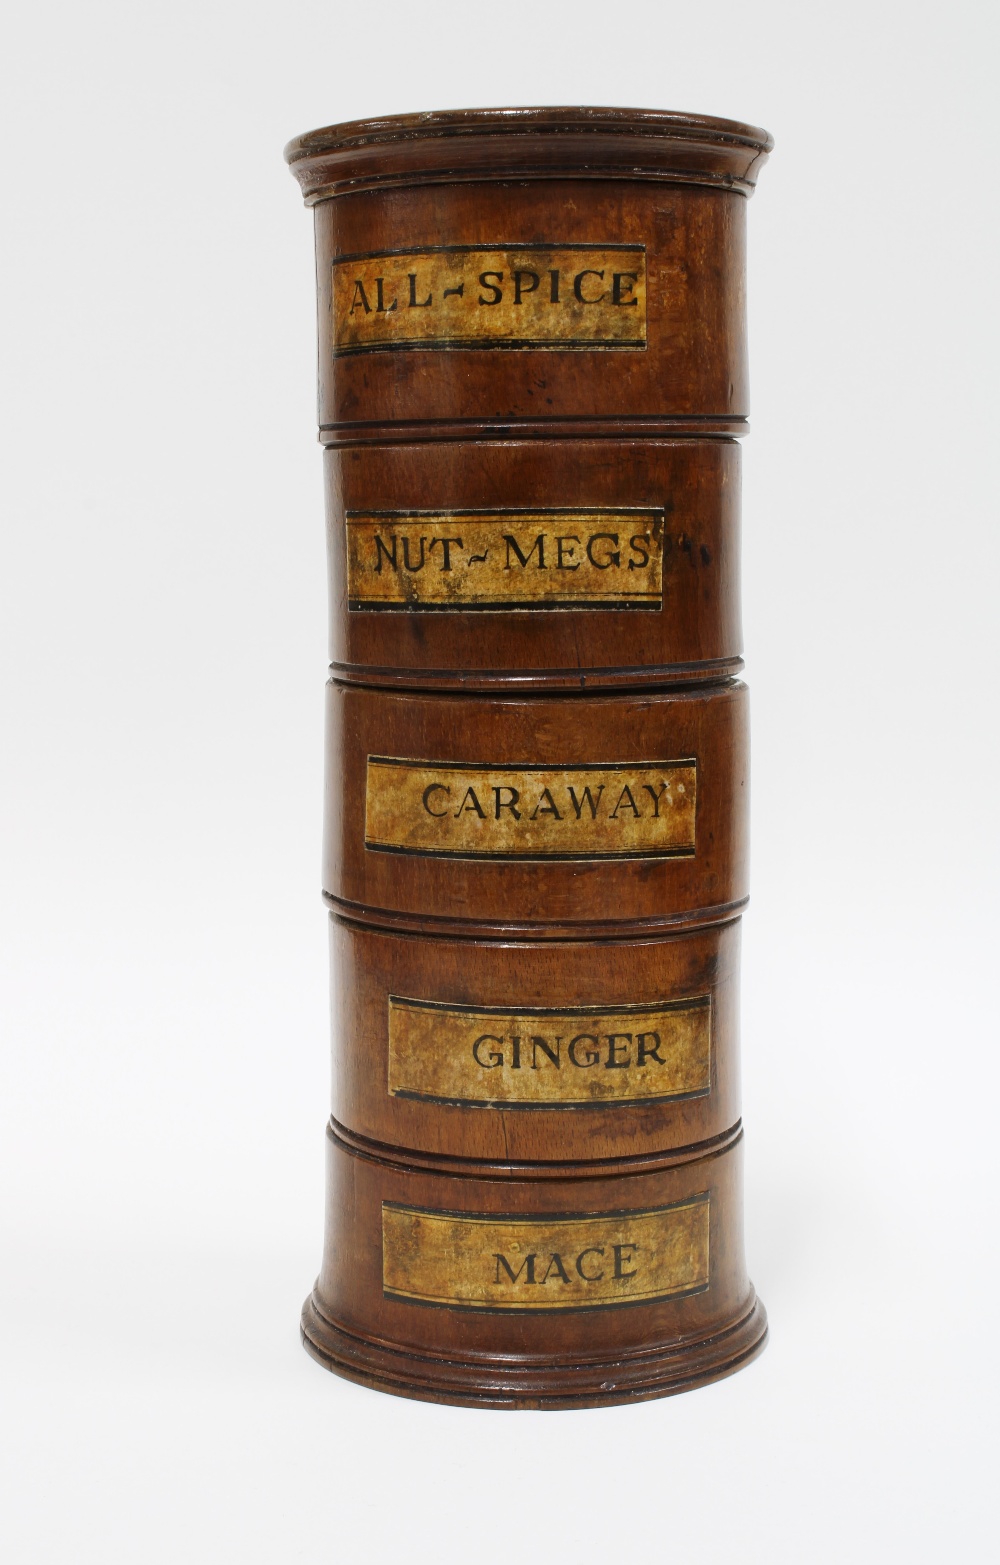 Treen spice tower with five sections with paper labels for All- Spice, Nut-Meg, Caraway, Ginger